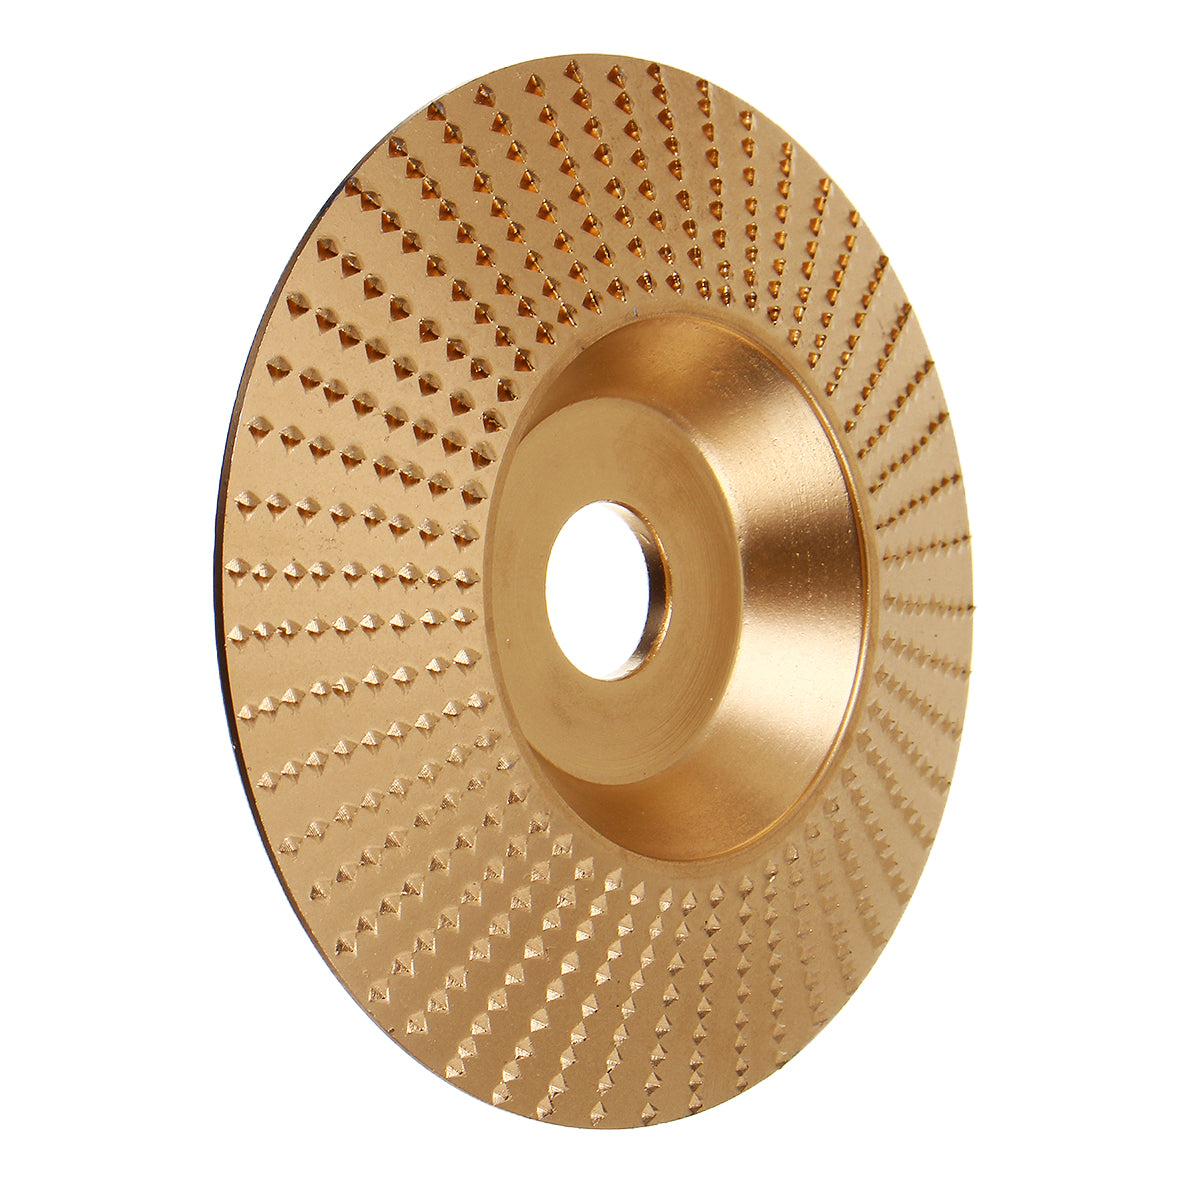 100x16mm Golden Wood Grinding Wheel Rotary Disc Sanding Wood Carving Abrasive Disc